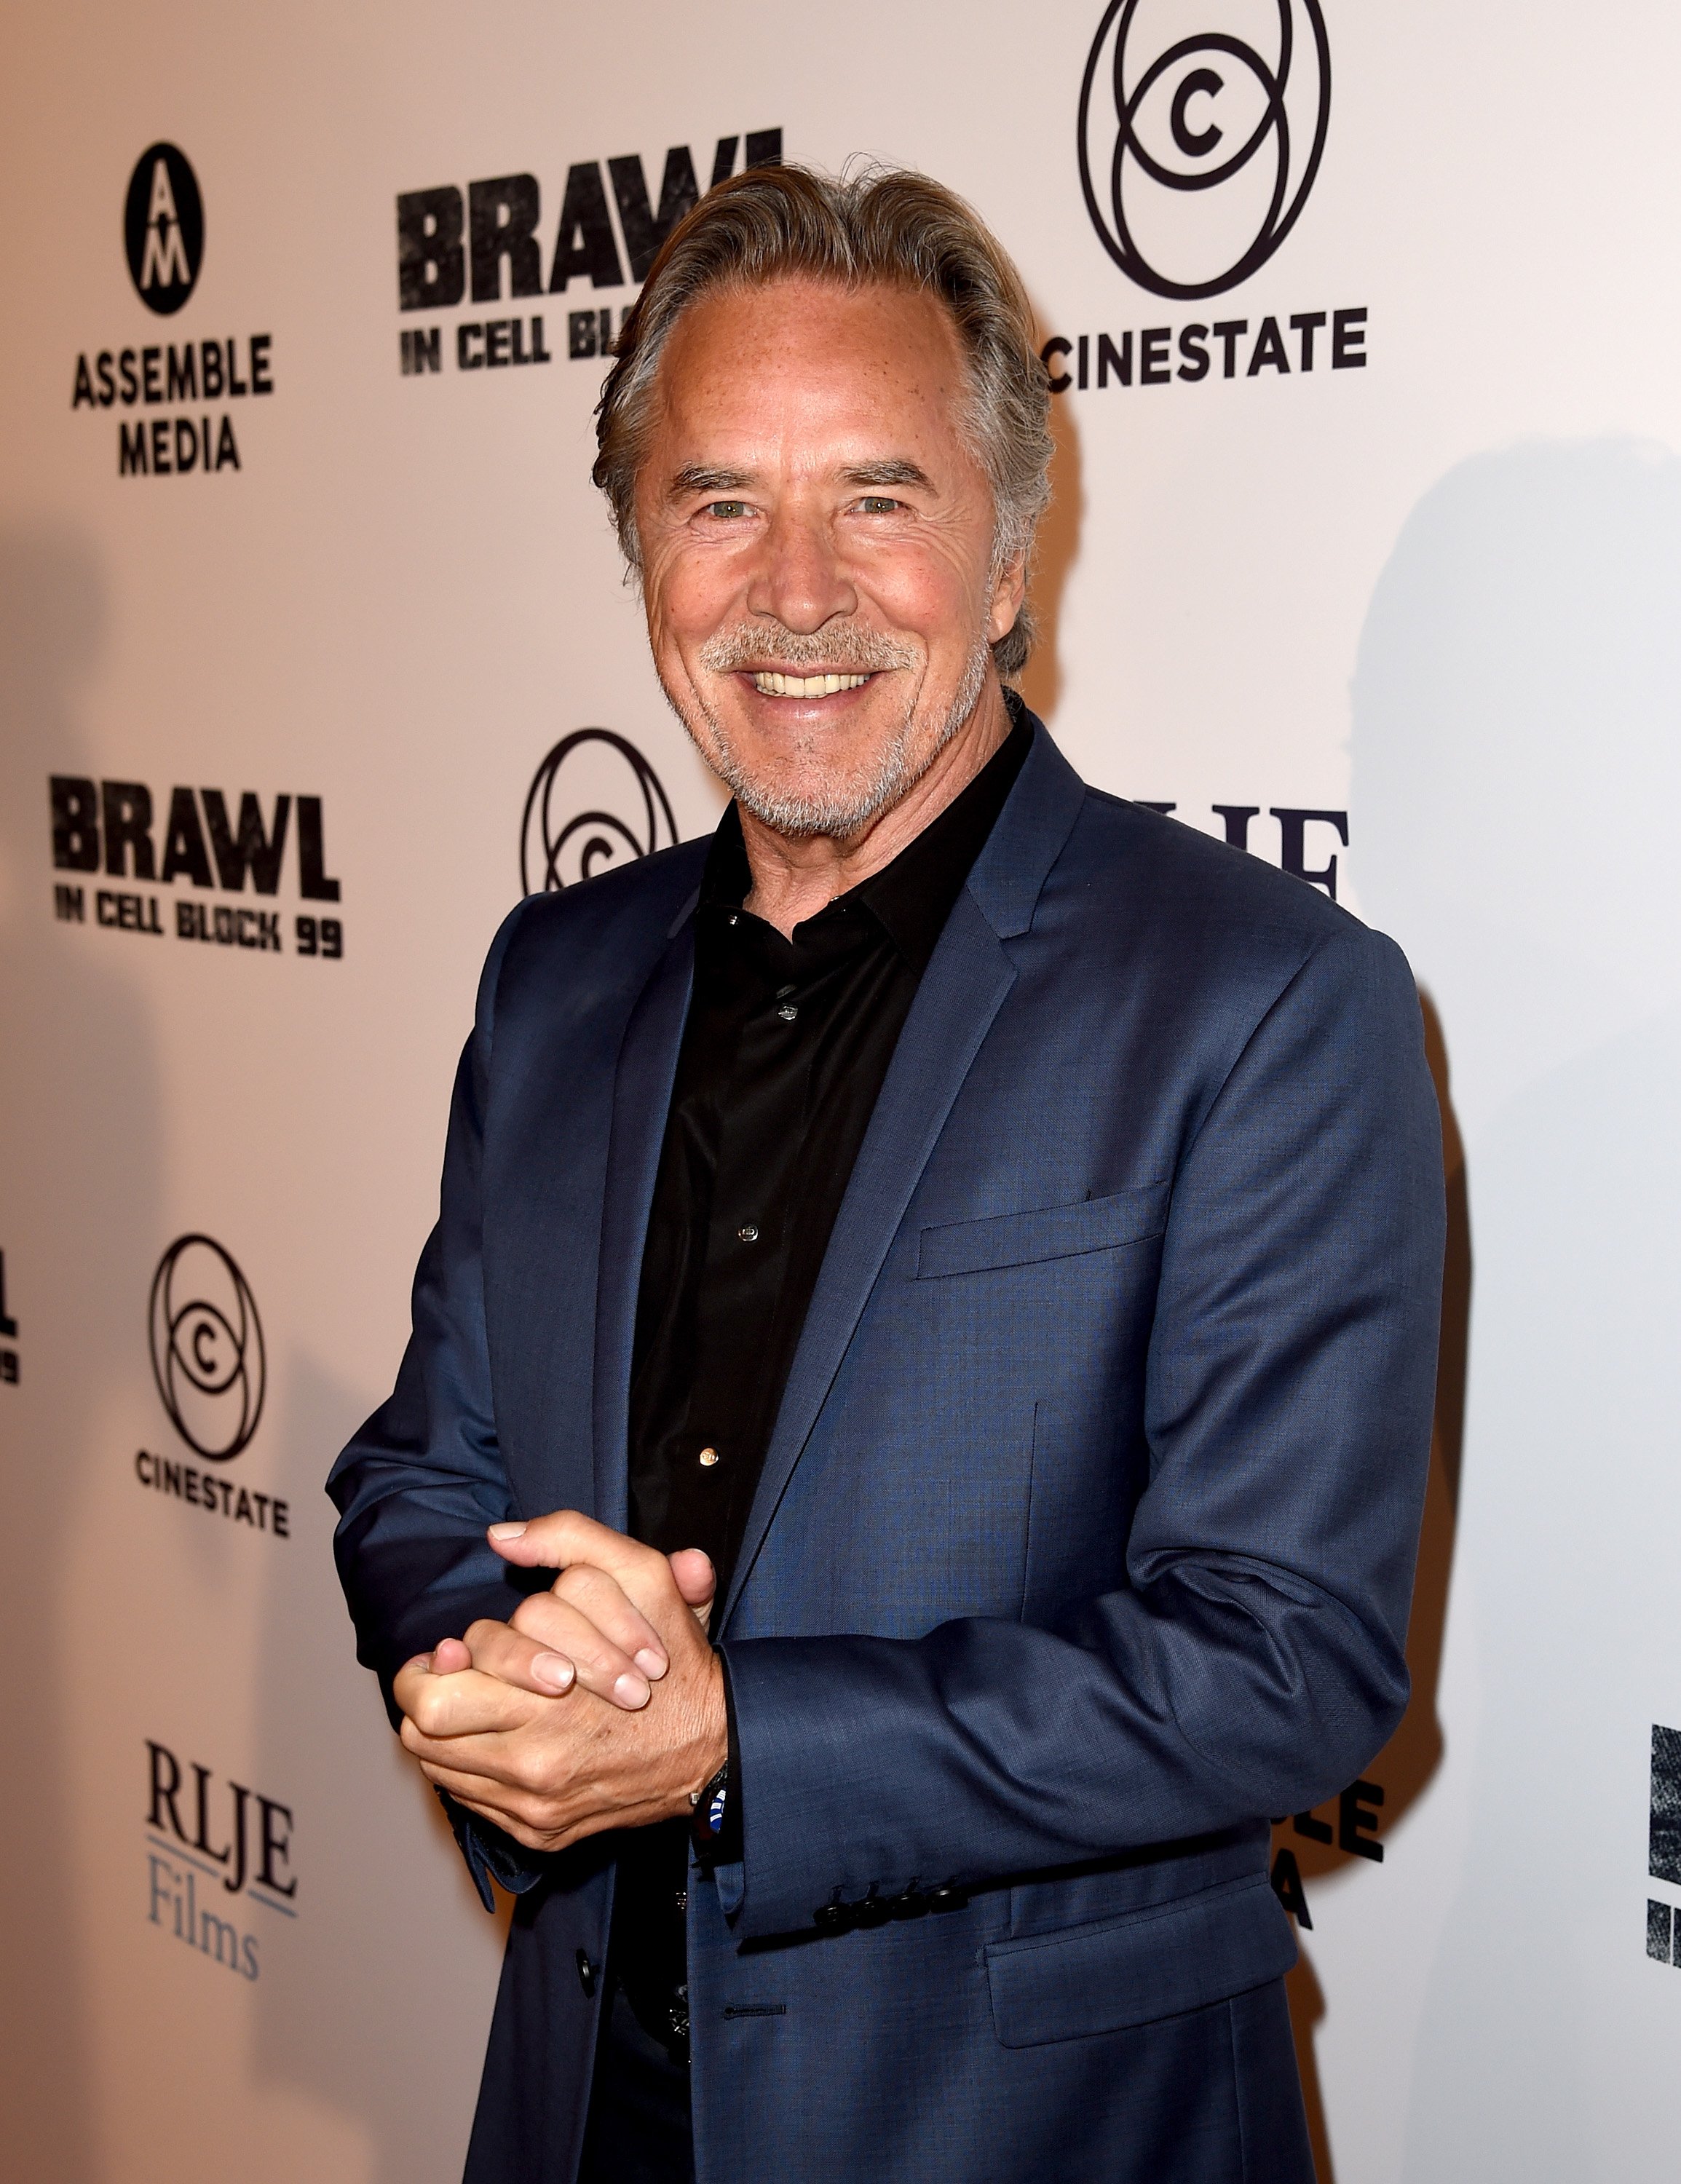 Don Johnson attends the premiere of RLJE Films' "Brawl In Cell Block 99" in September 2017 | Photo: Getty Images